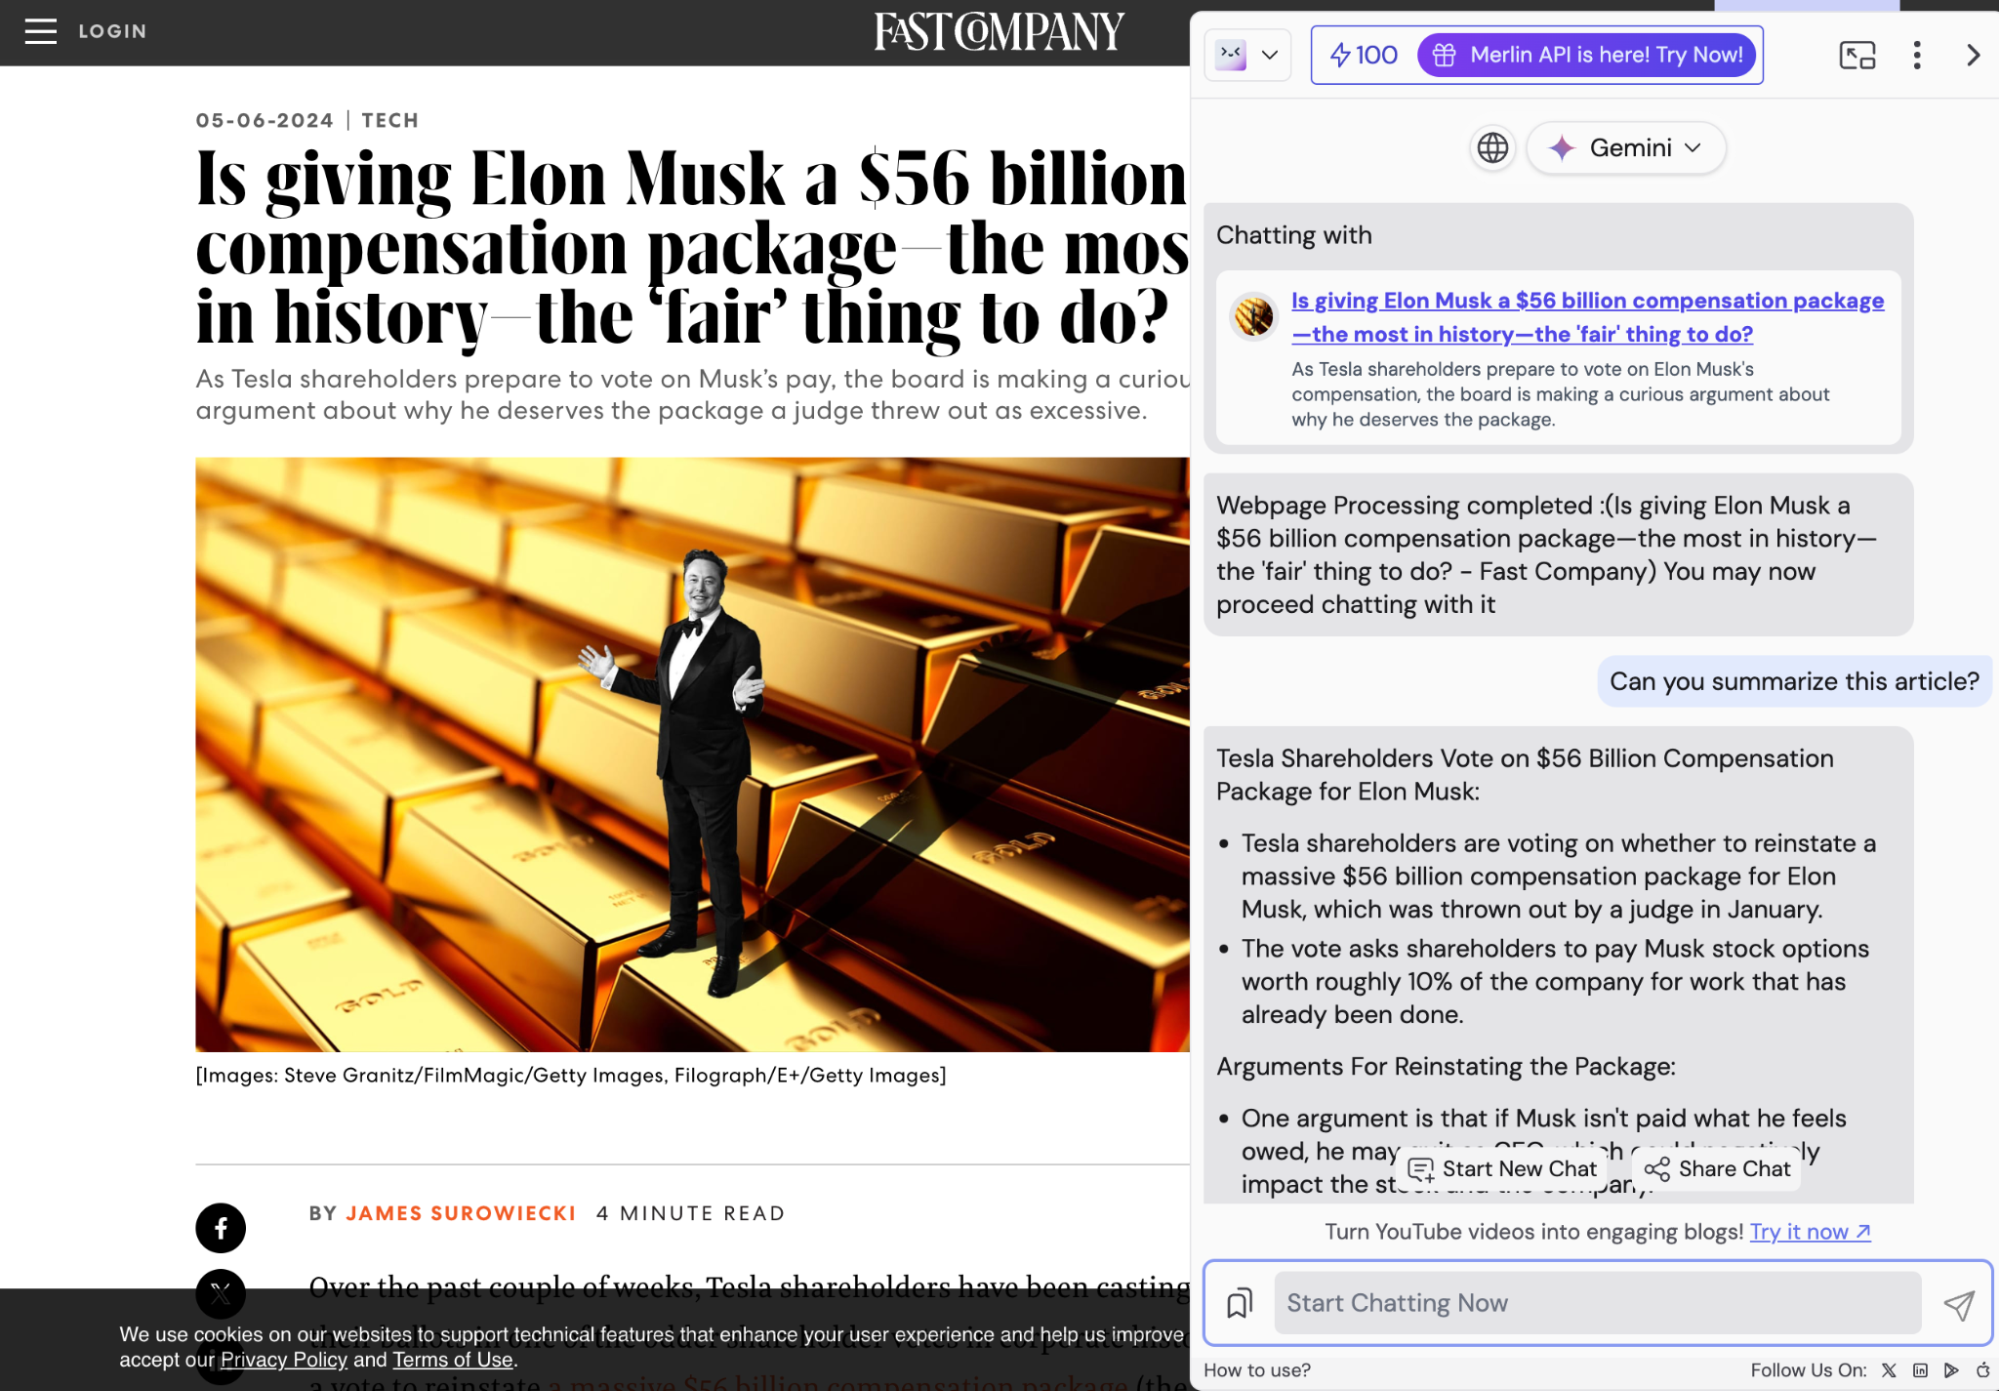 Merlin extension summarizing a Fast Company article about Elon Musk’s compensation package.